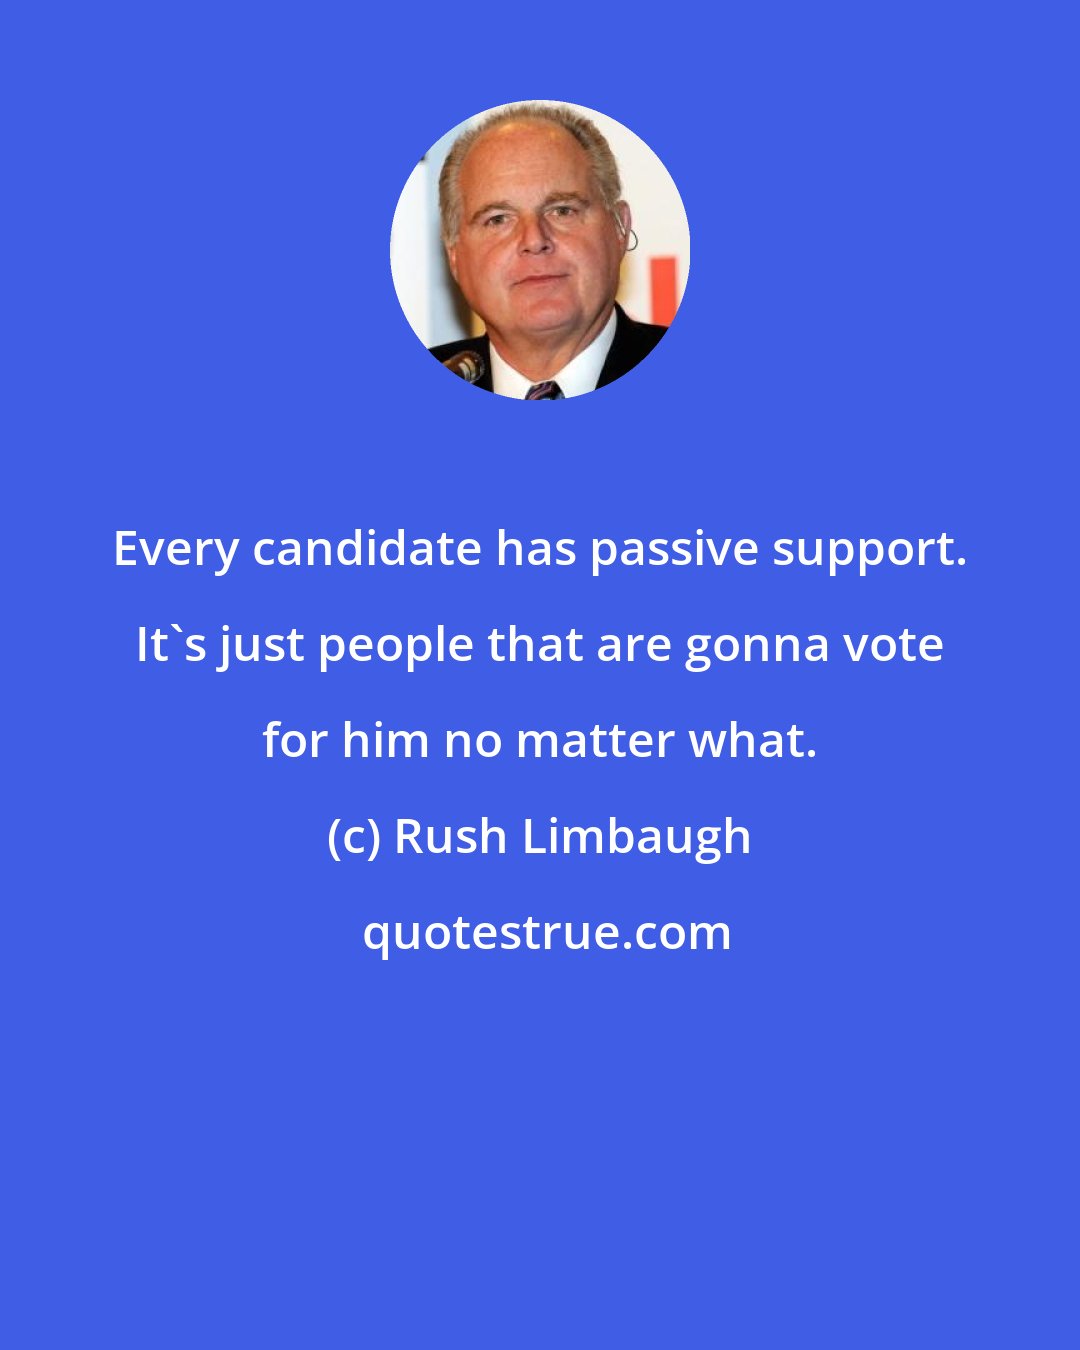 Rush Limbaugh: Every candidate has passive support. It's just people that are gonna vote for him no matter what.